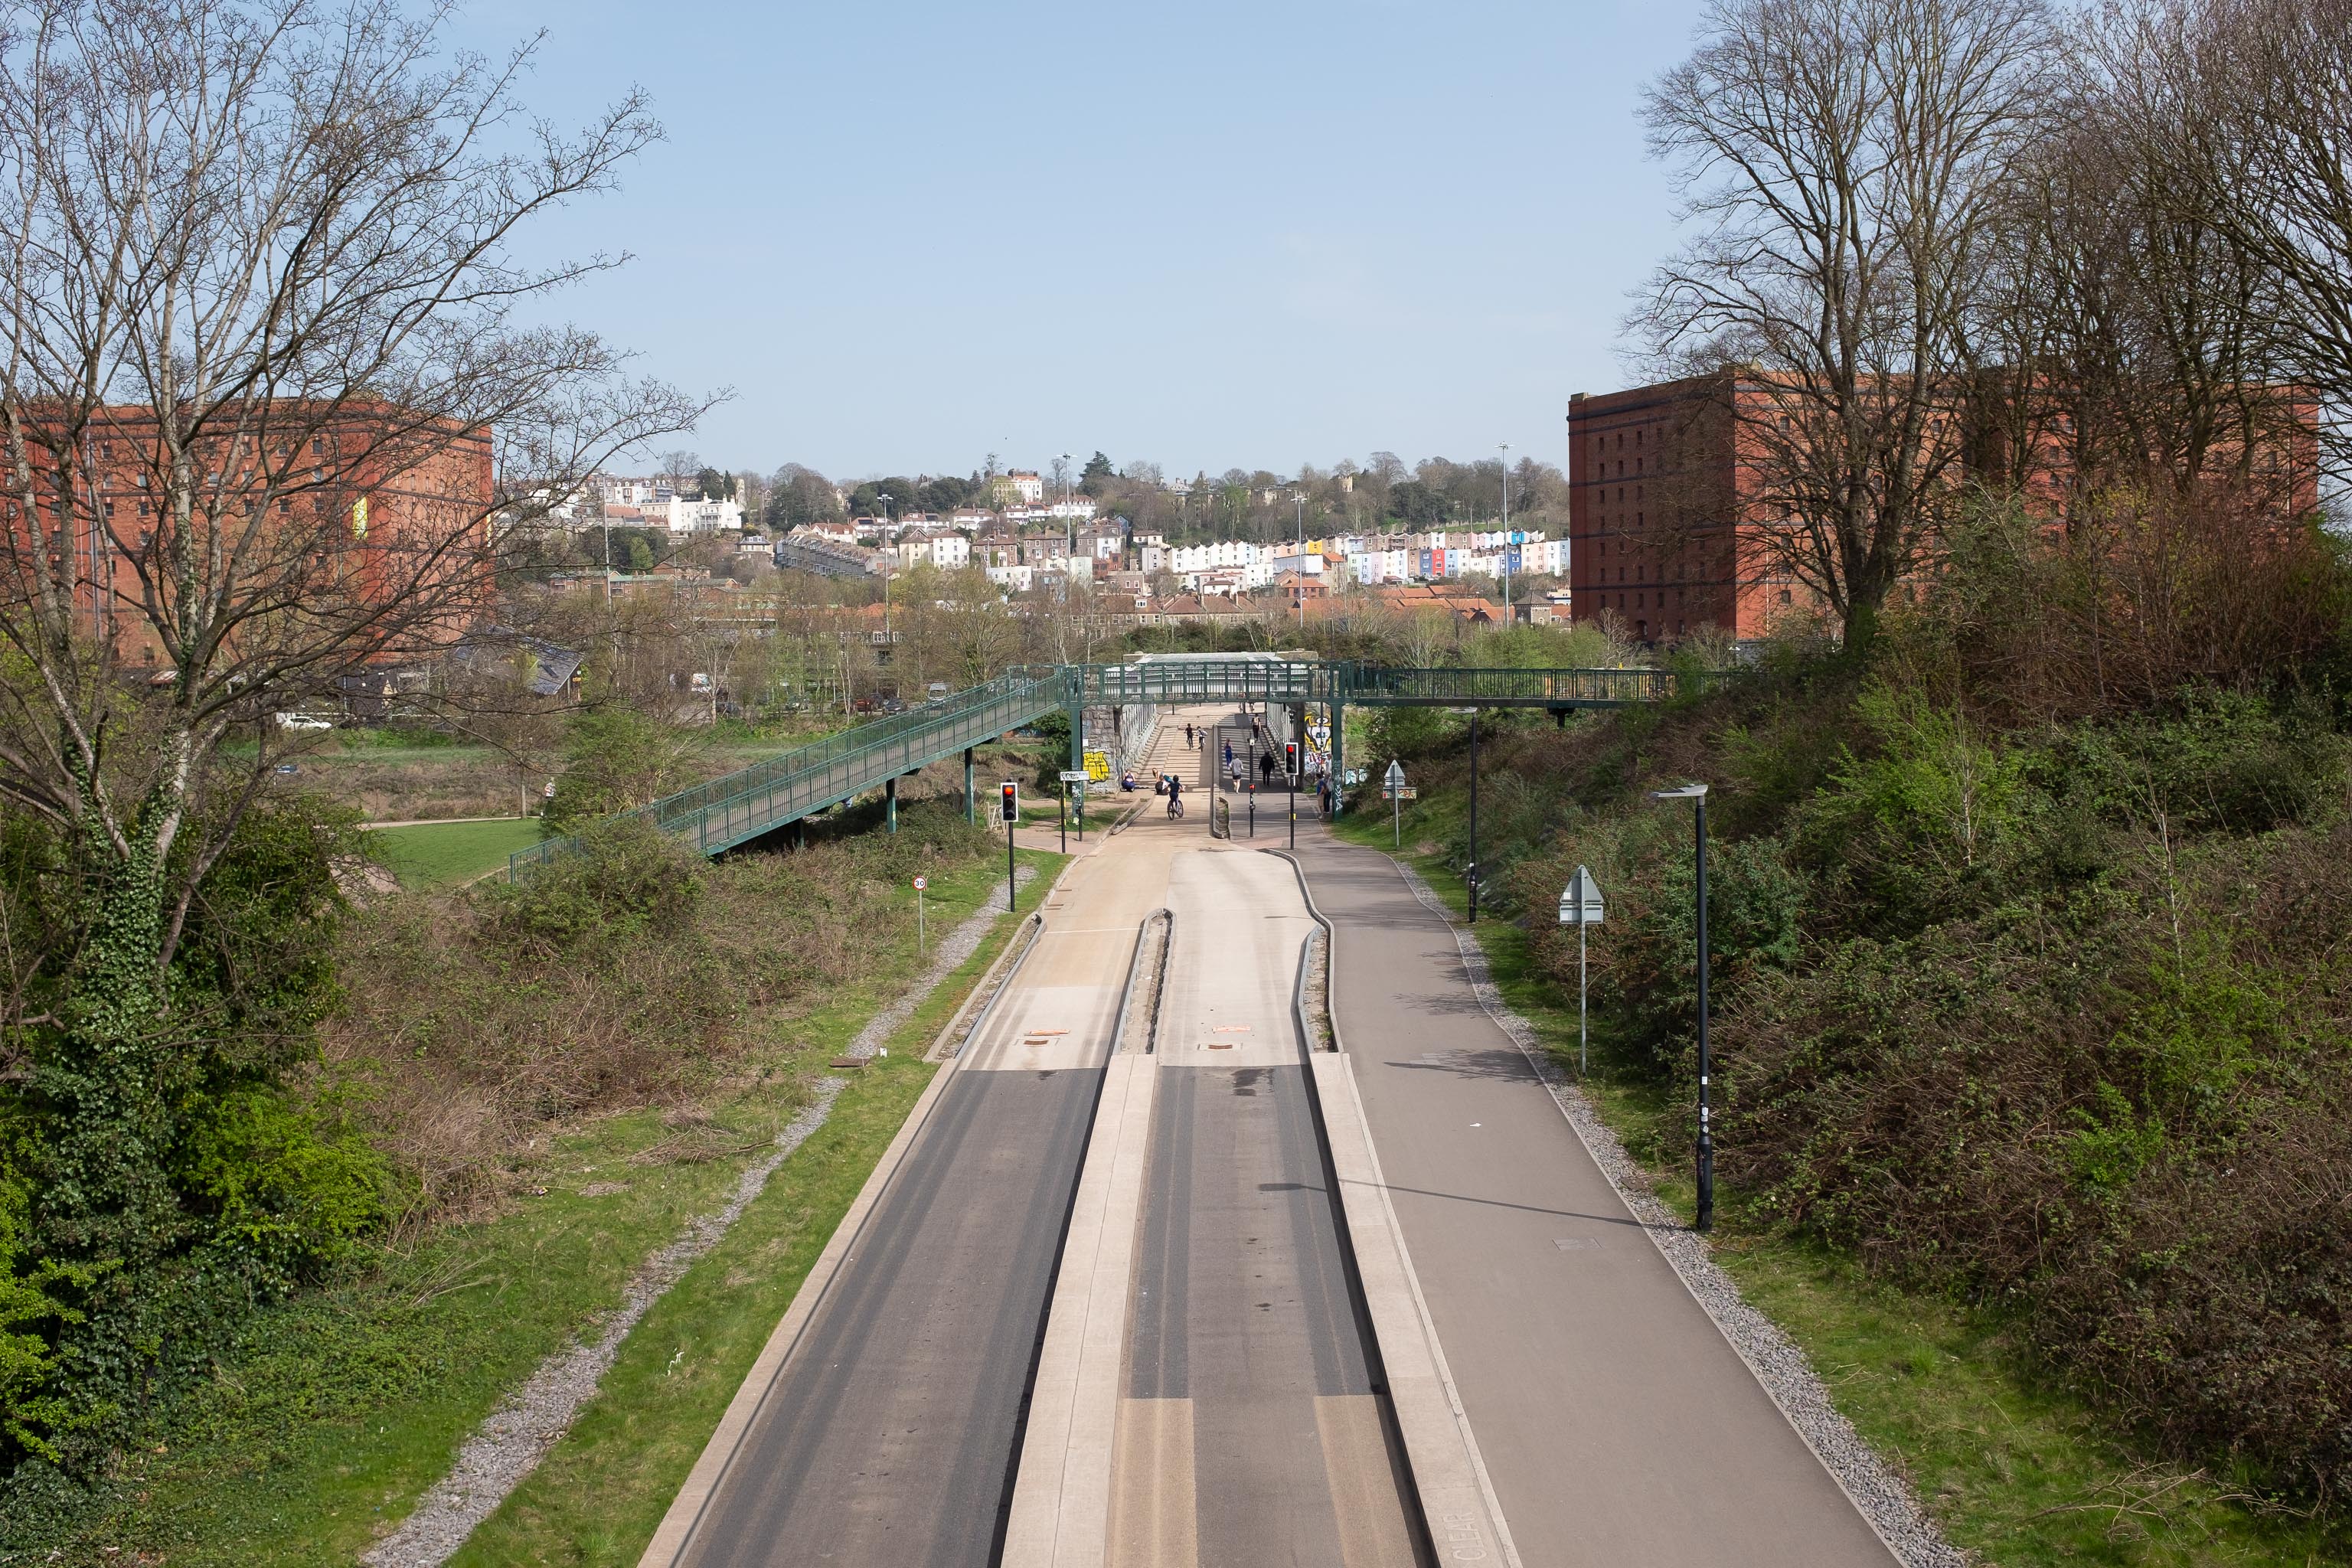 Guided Busway
